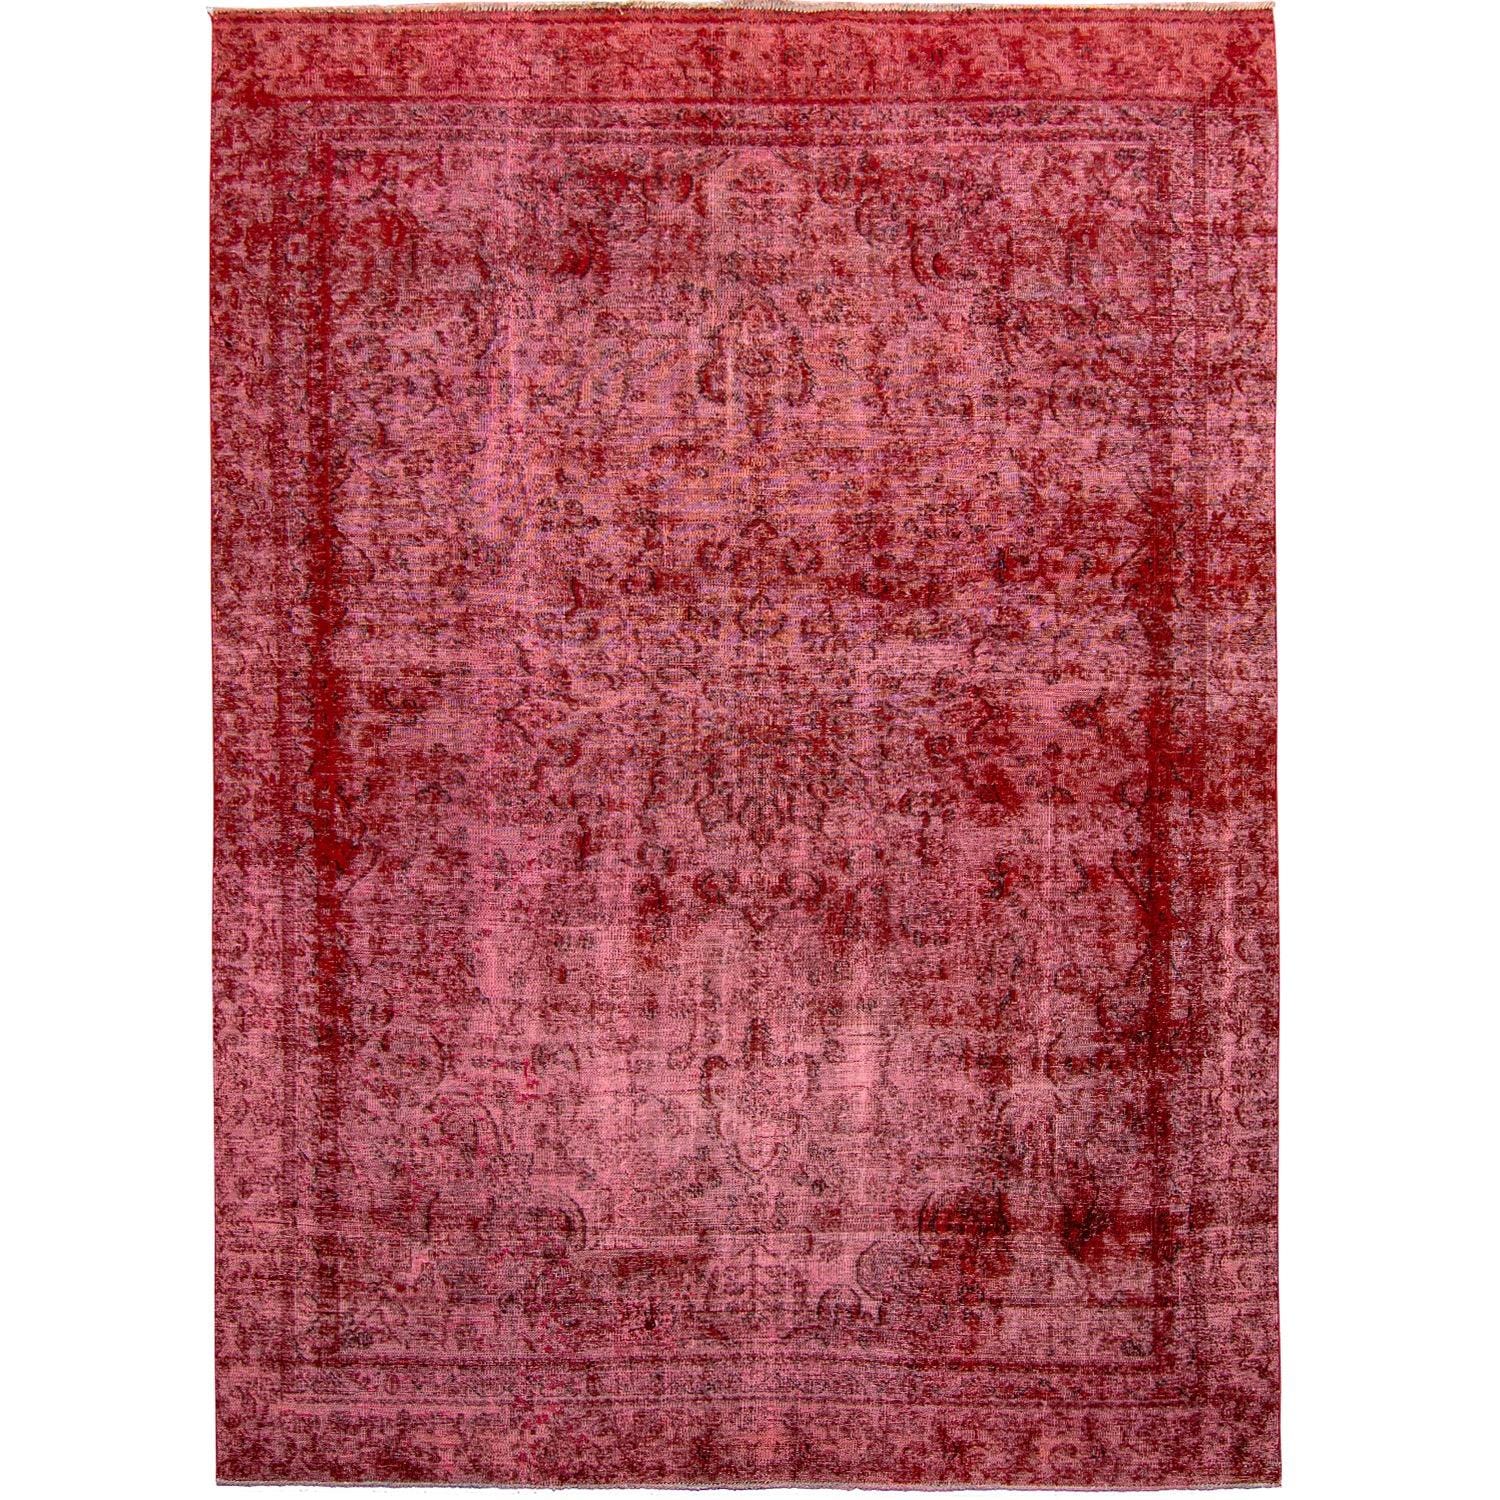 Hand-knotted Wool Persian Vintage Rug 256cm x 364cm